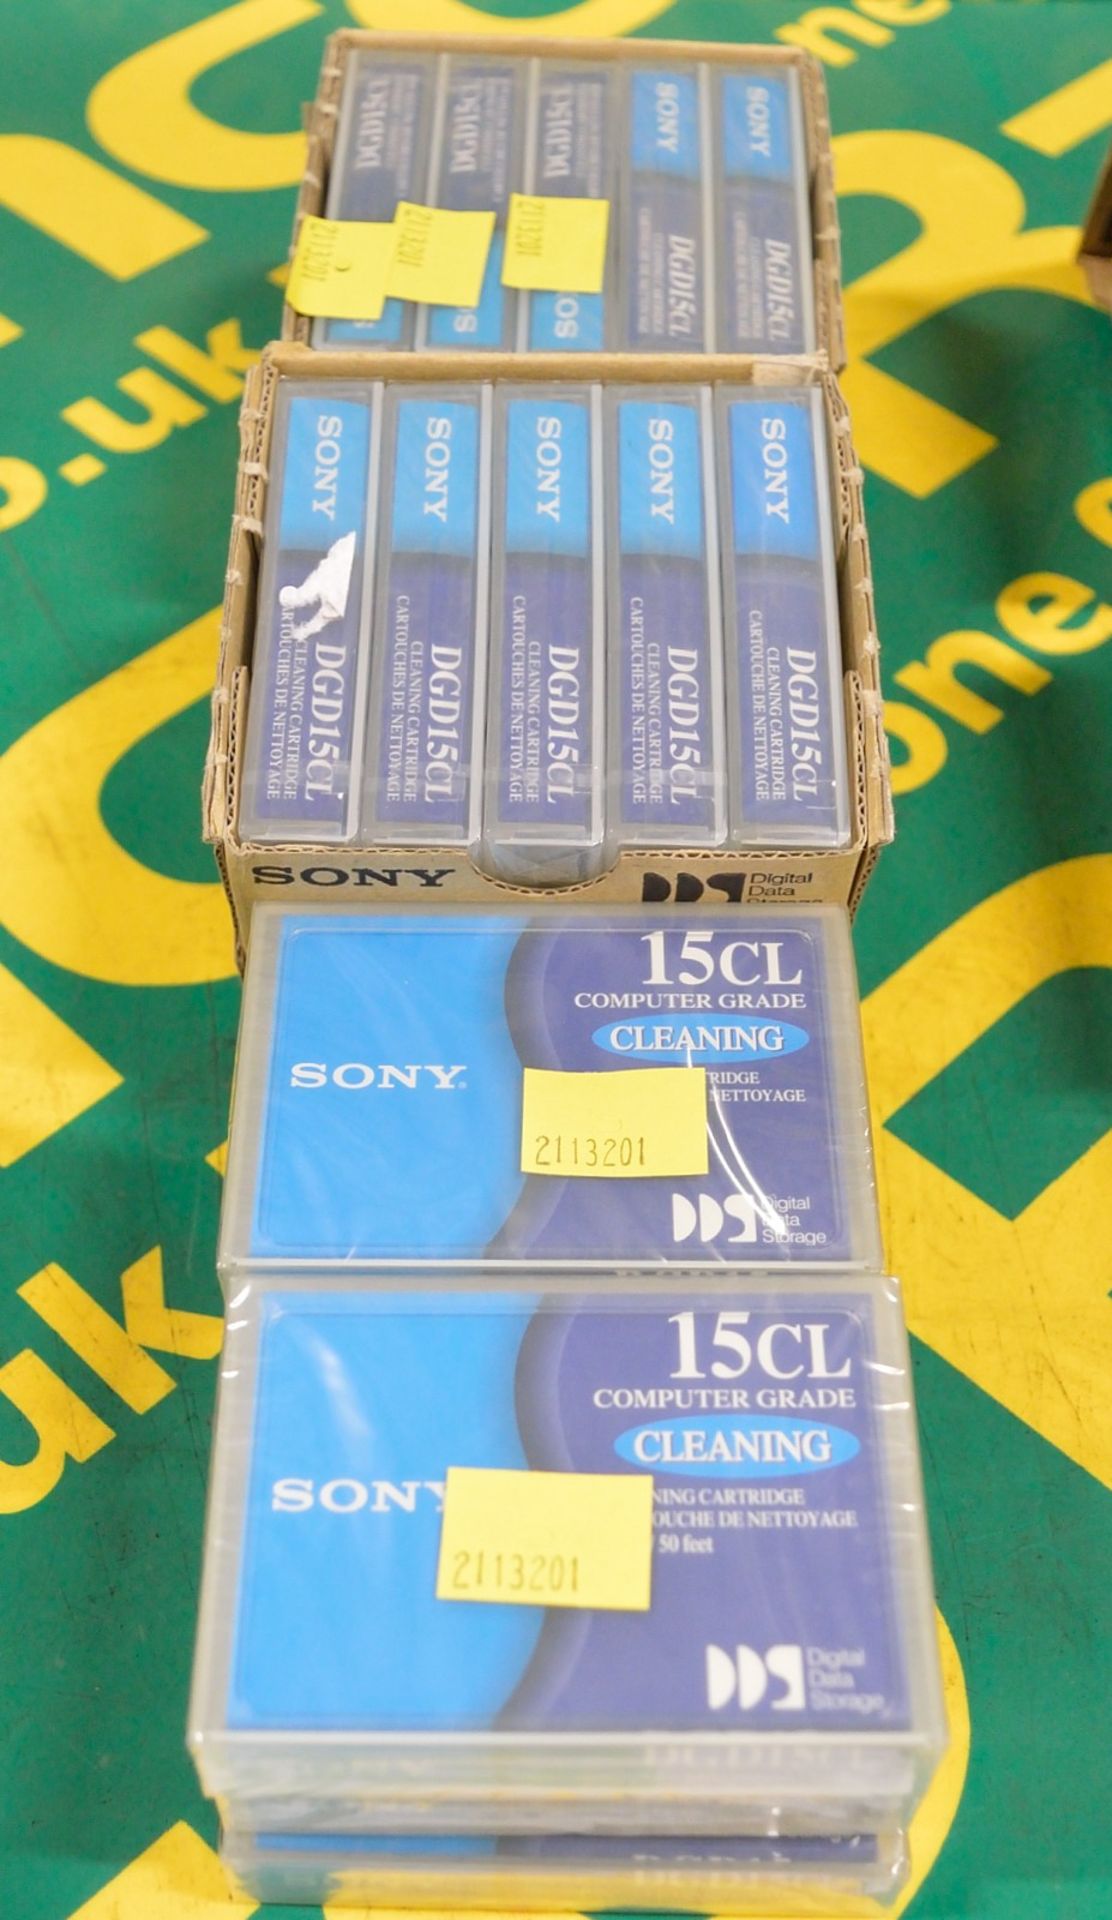 16x Sony Cleaning Cartridges DGD15CL.